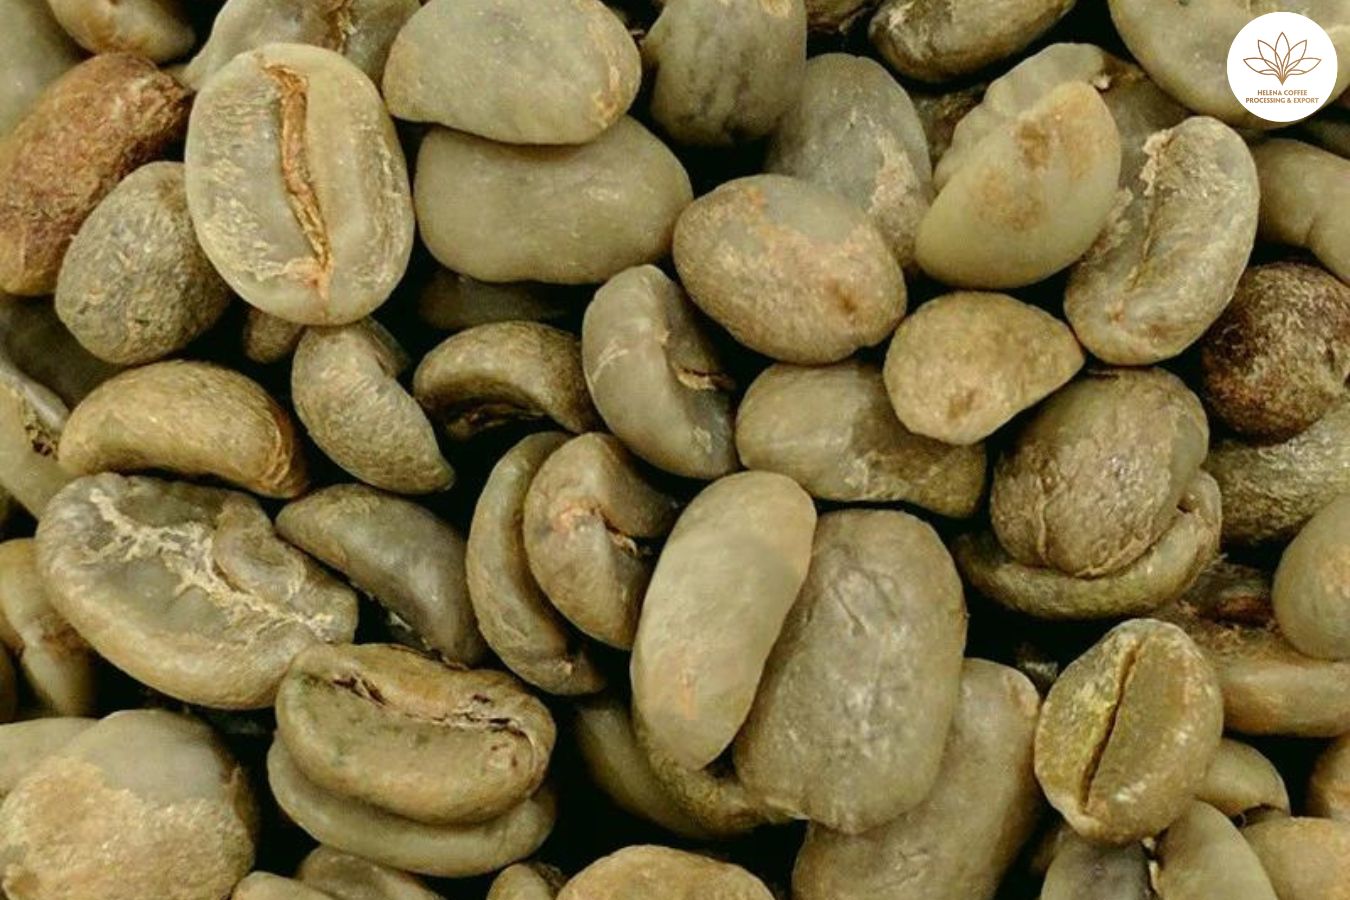 Wholesale Green Coffee Beans Canada Top Choice